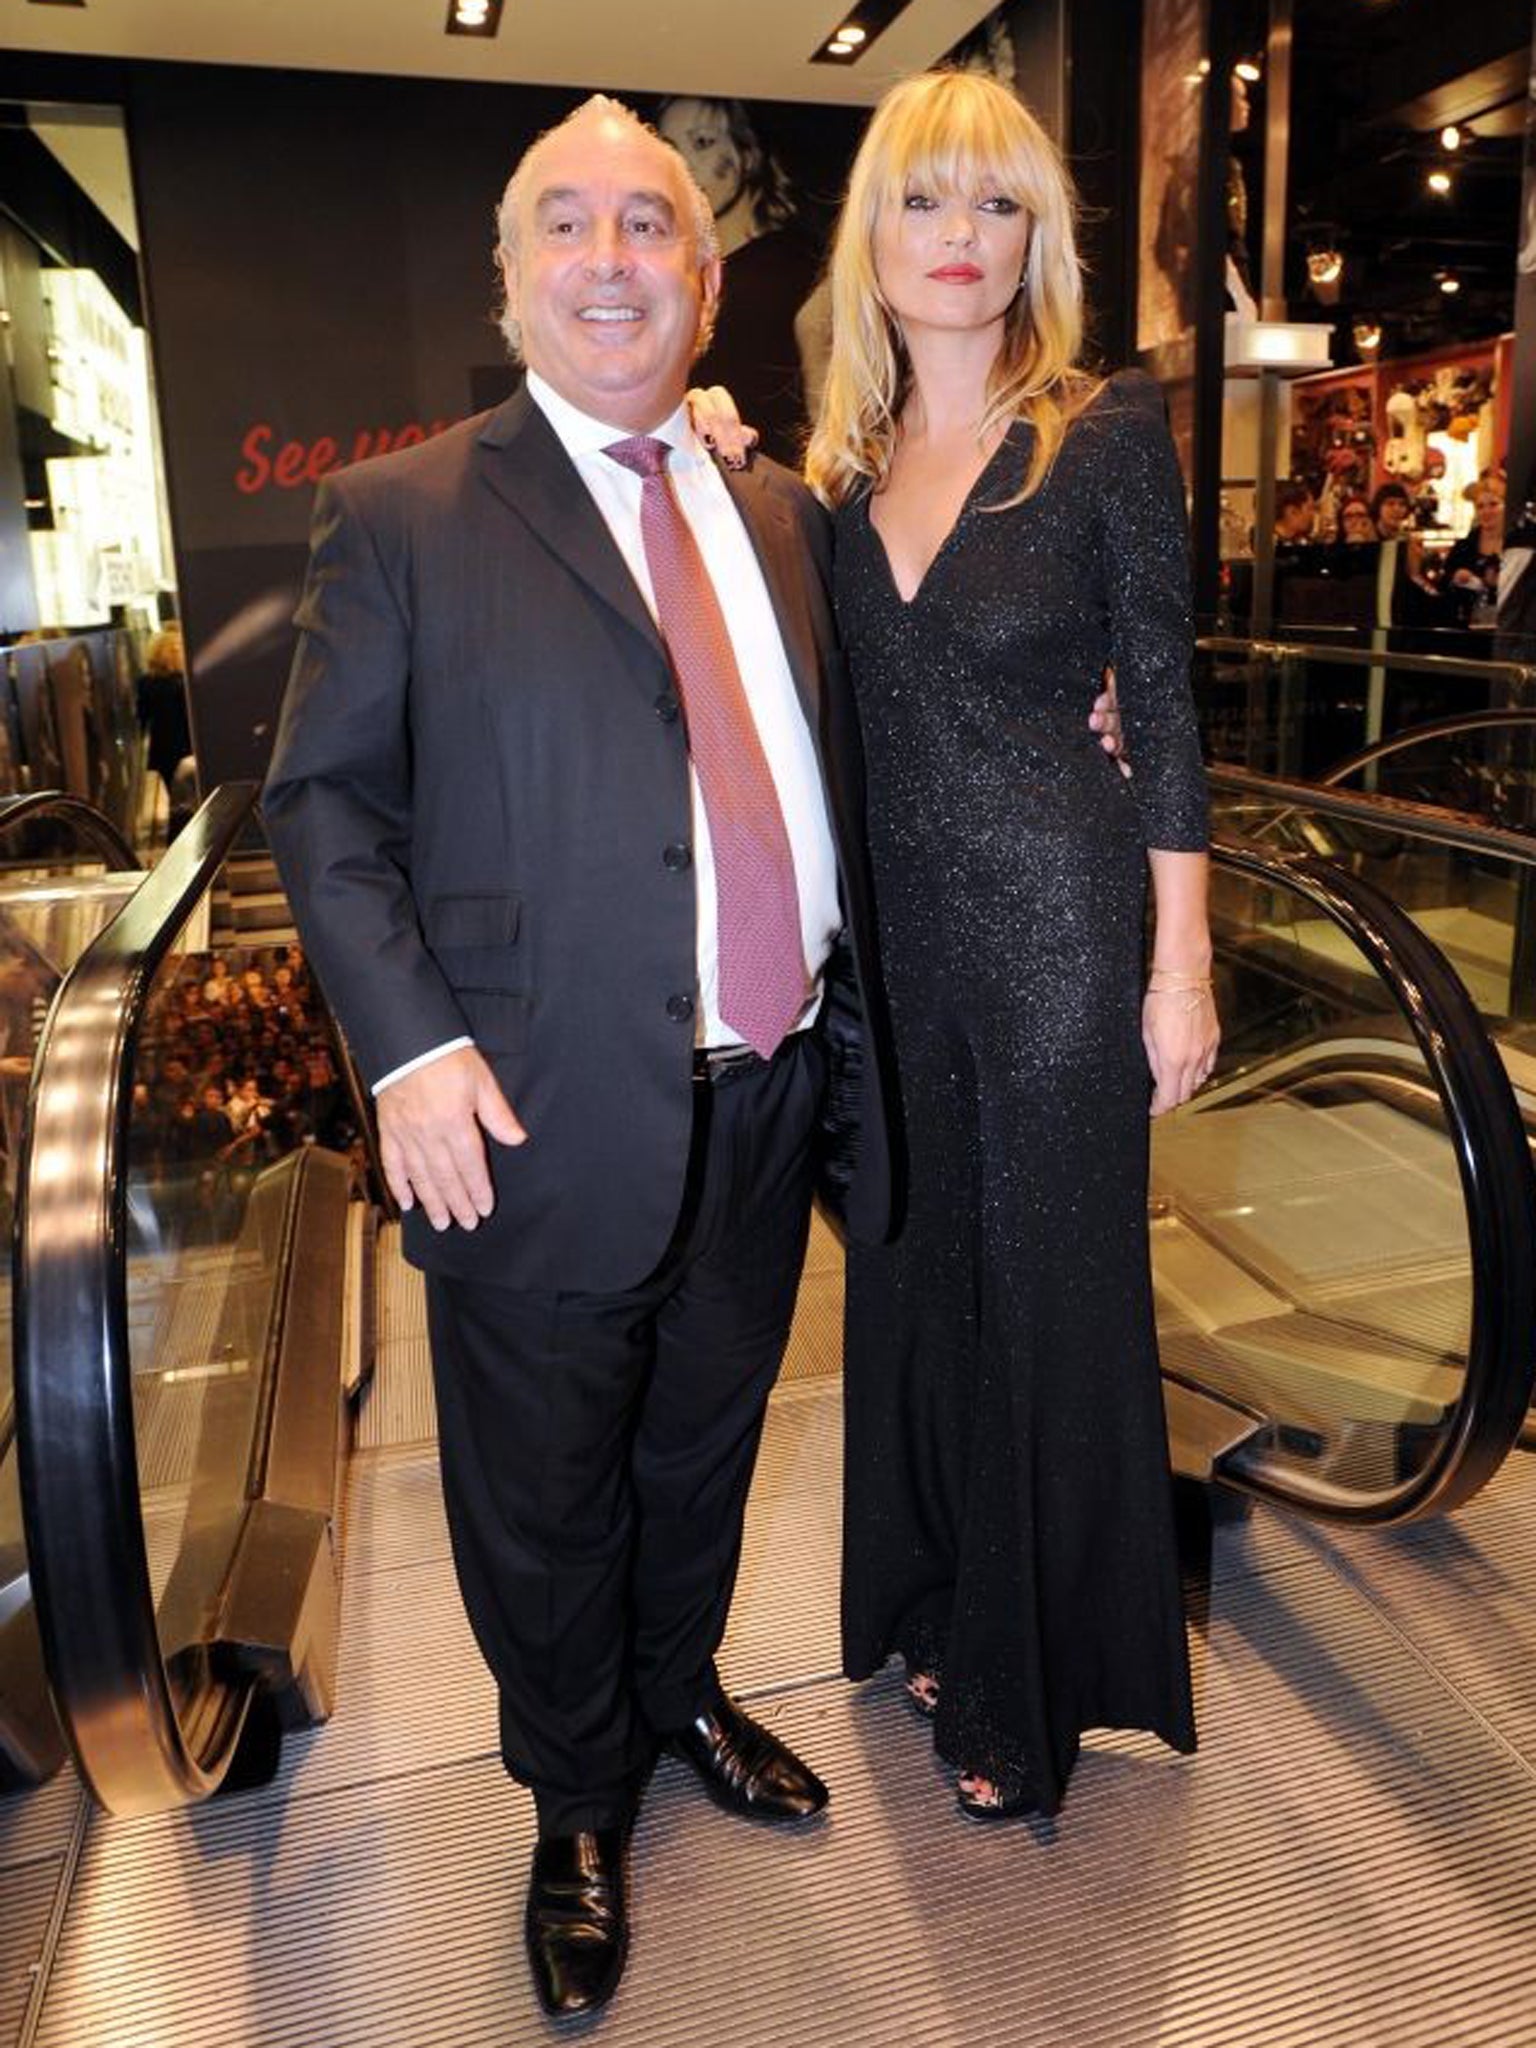 Sir Philip at Topshop's flagship Oxford Street store with model Kate Moss